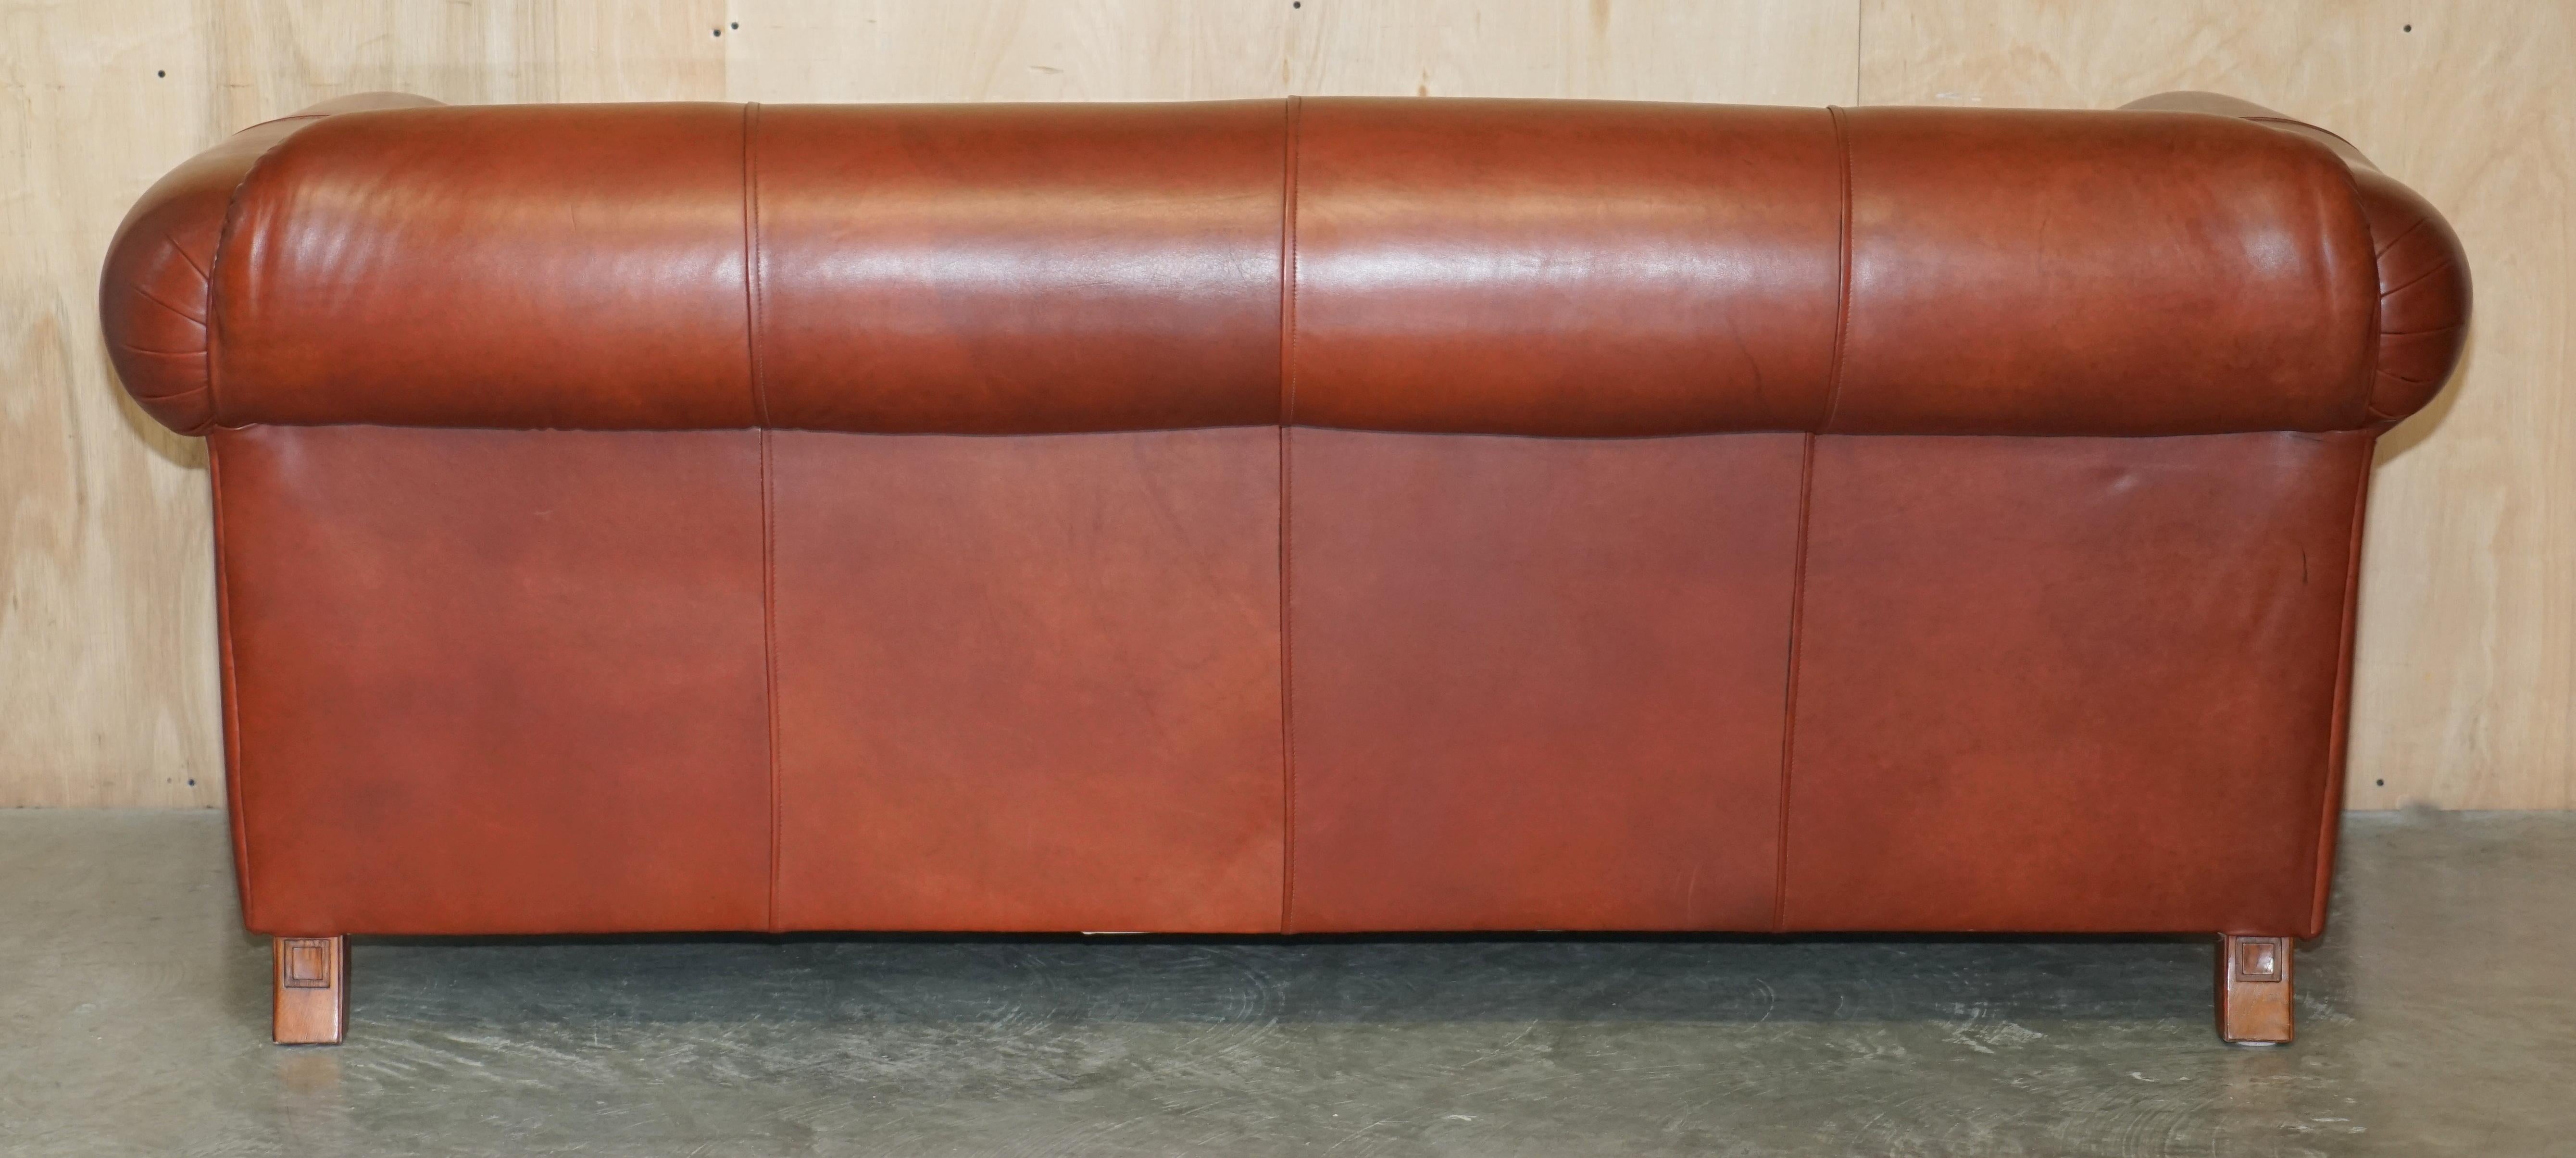 ViNTAGE CHESTNUT BROWN LEATHER LIBERTY'S ART NOUVEAU CLUB SOFA CARVED WOOD FRAMe For Sale 11